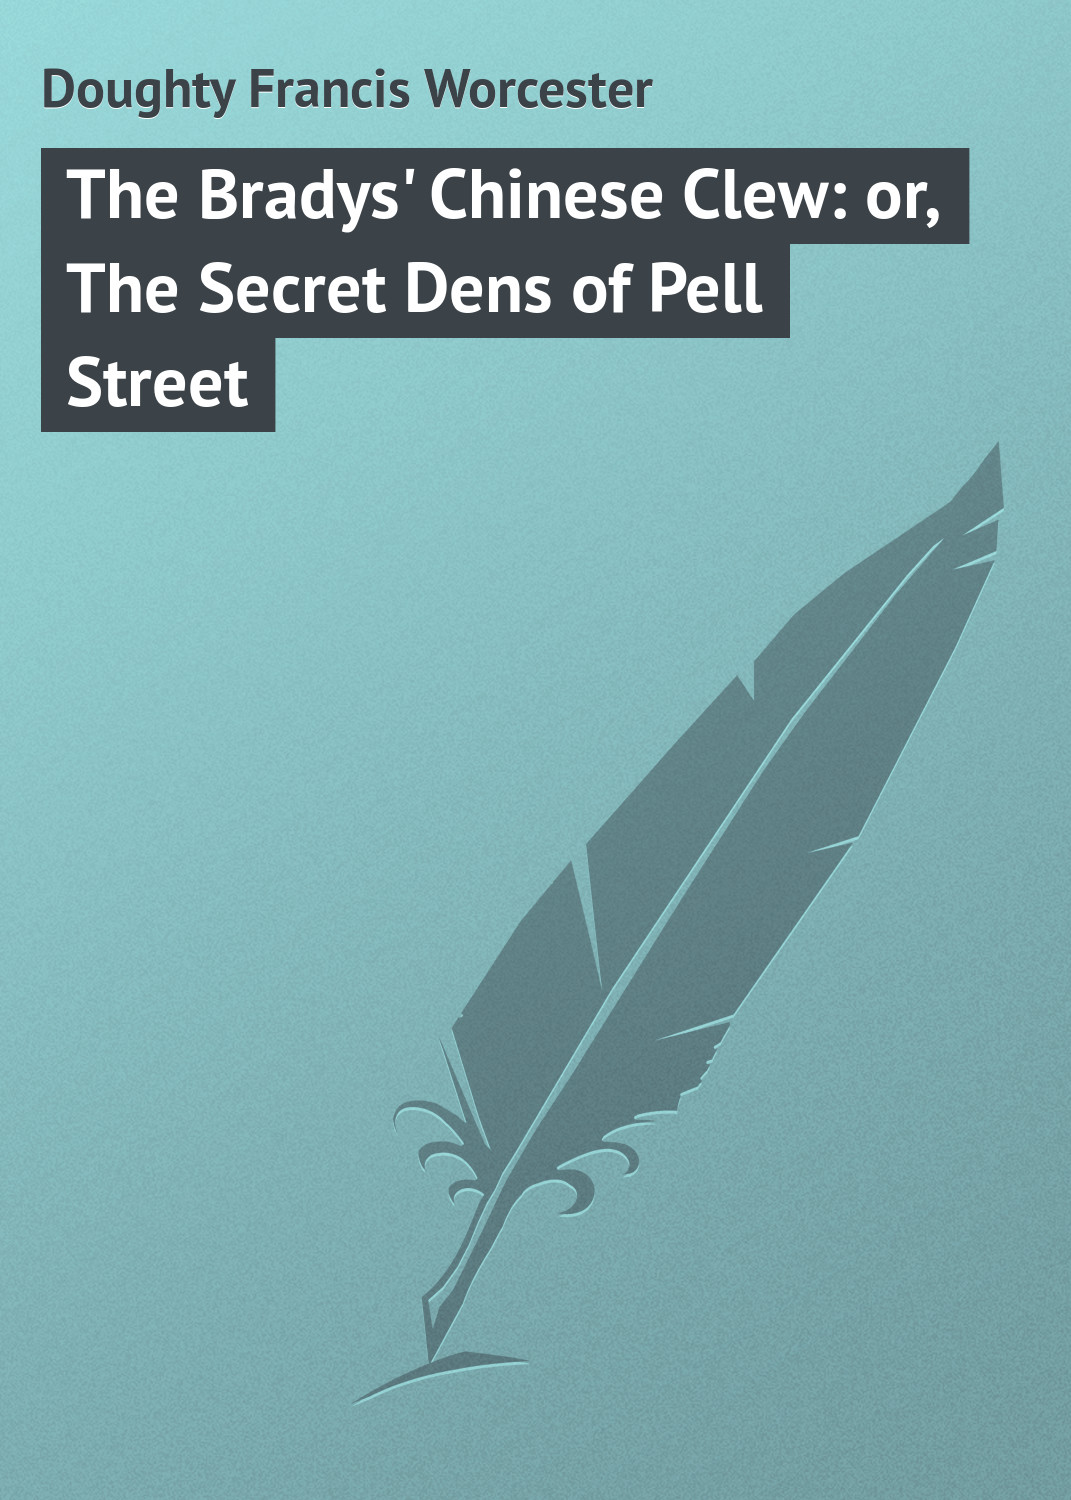 The Bradys'Chinese Clew: or, The Secret Dens of Pell Street